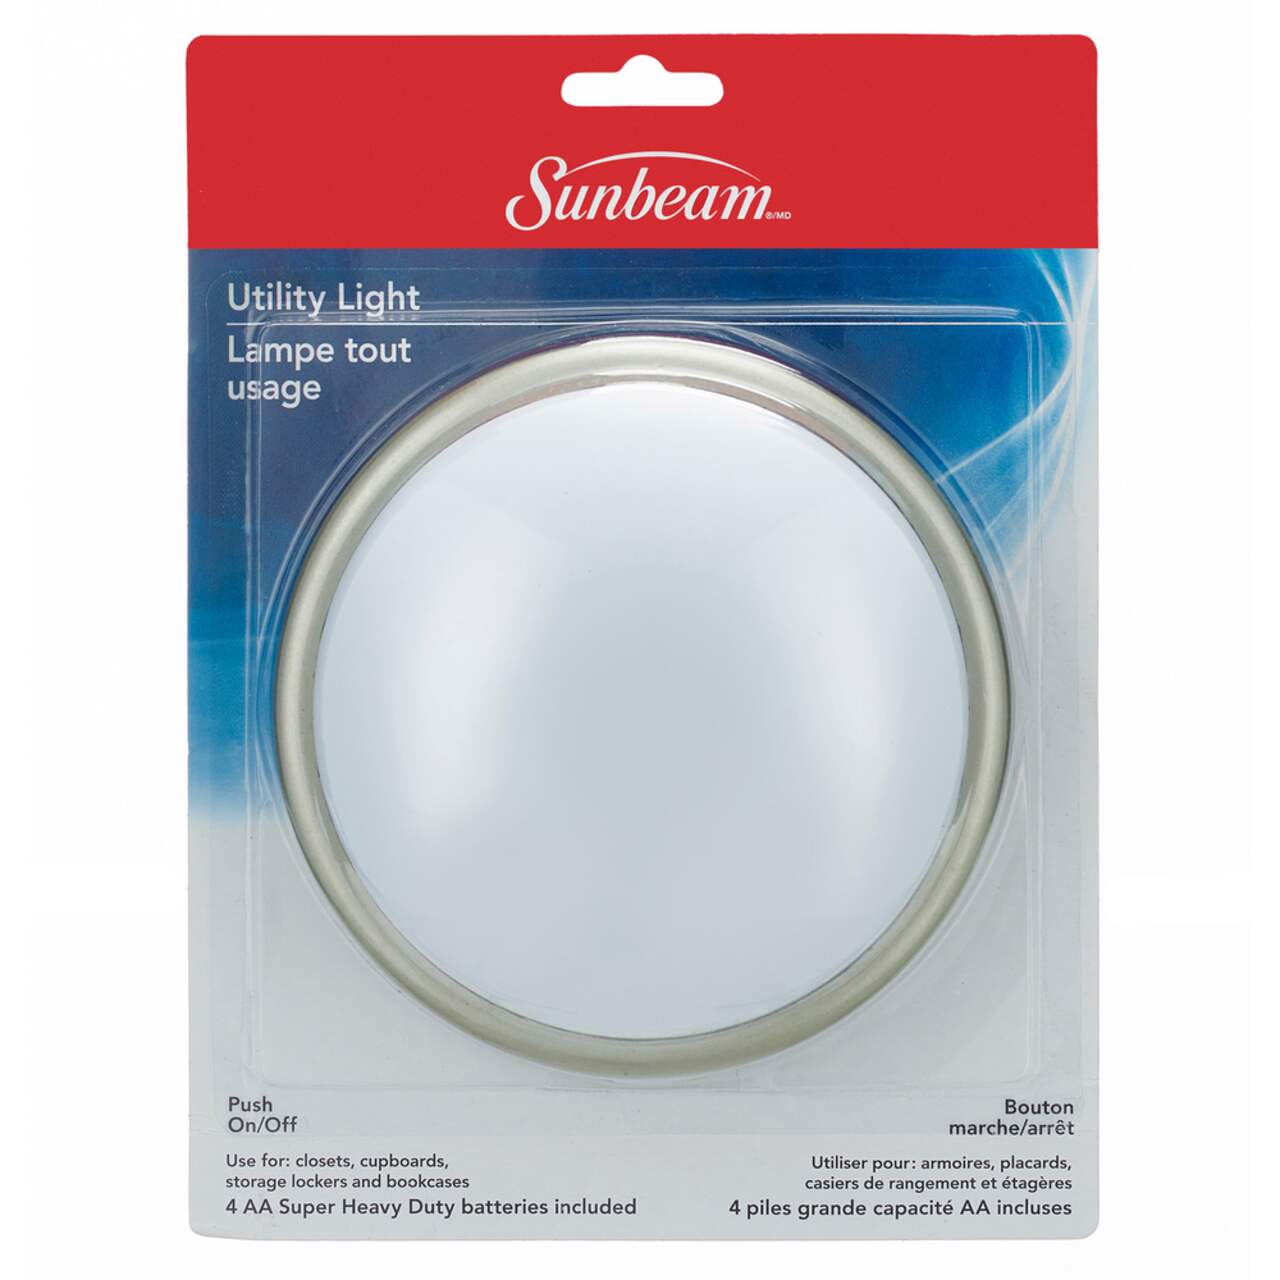 https://media-www.canadiantire.ca/product/living/home-decor/lighting/0525739/battery-operated-utility-light-0d527dda-2a76-449c-9f40-70686f71a126.png?imdensity=1&imwidth=640&impolicy=mZoom